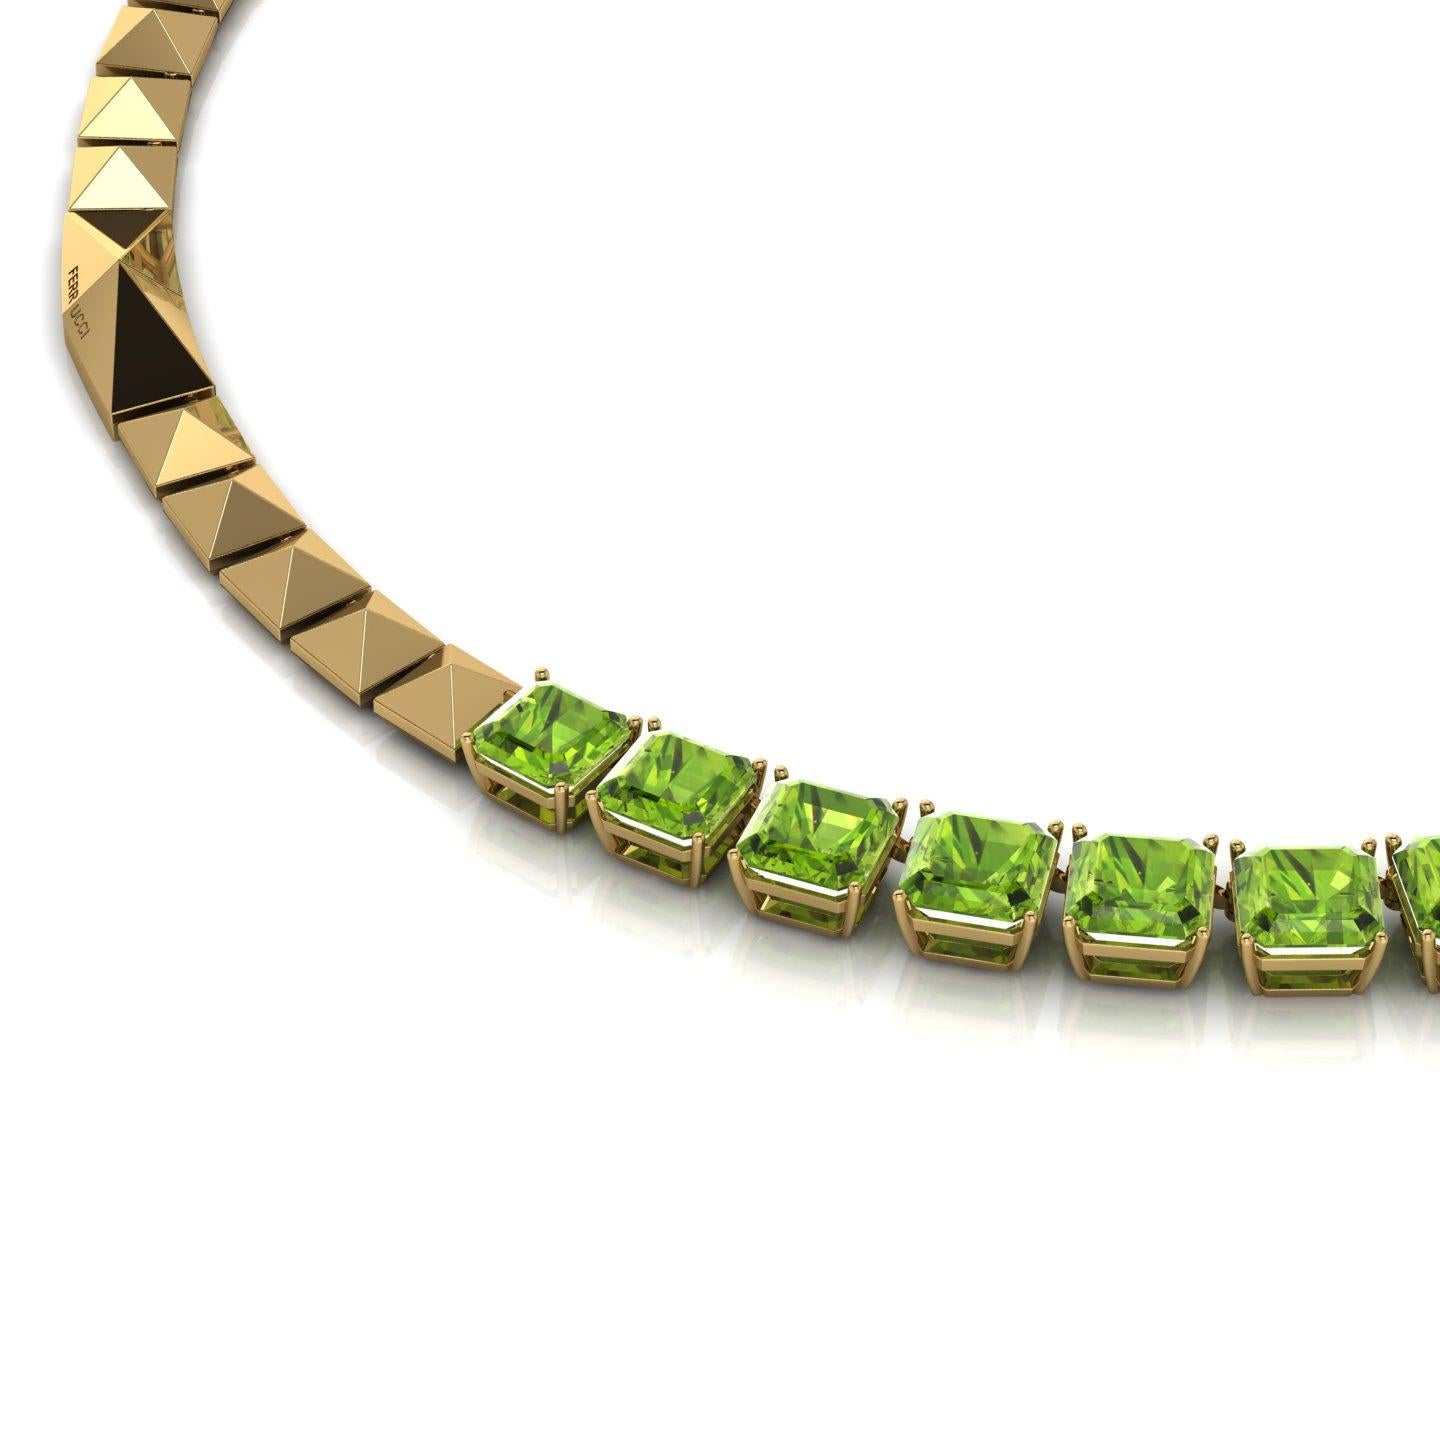 A unique necklaces showcasing approximately 129 carats of natural, eye clean, vivid green Peridots, graduated perfectly to conceived a bespoke necklace in 18k yellow gold with FERRUCCI's signature gold pyramids and a uniquely designed clasp.
The